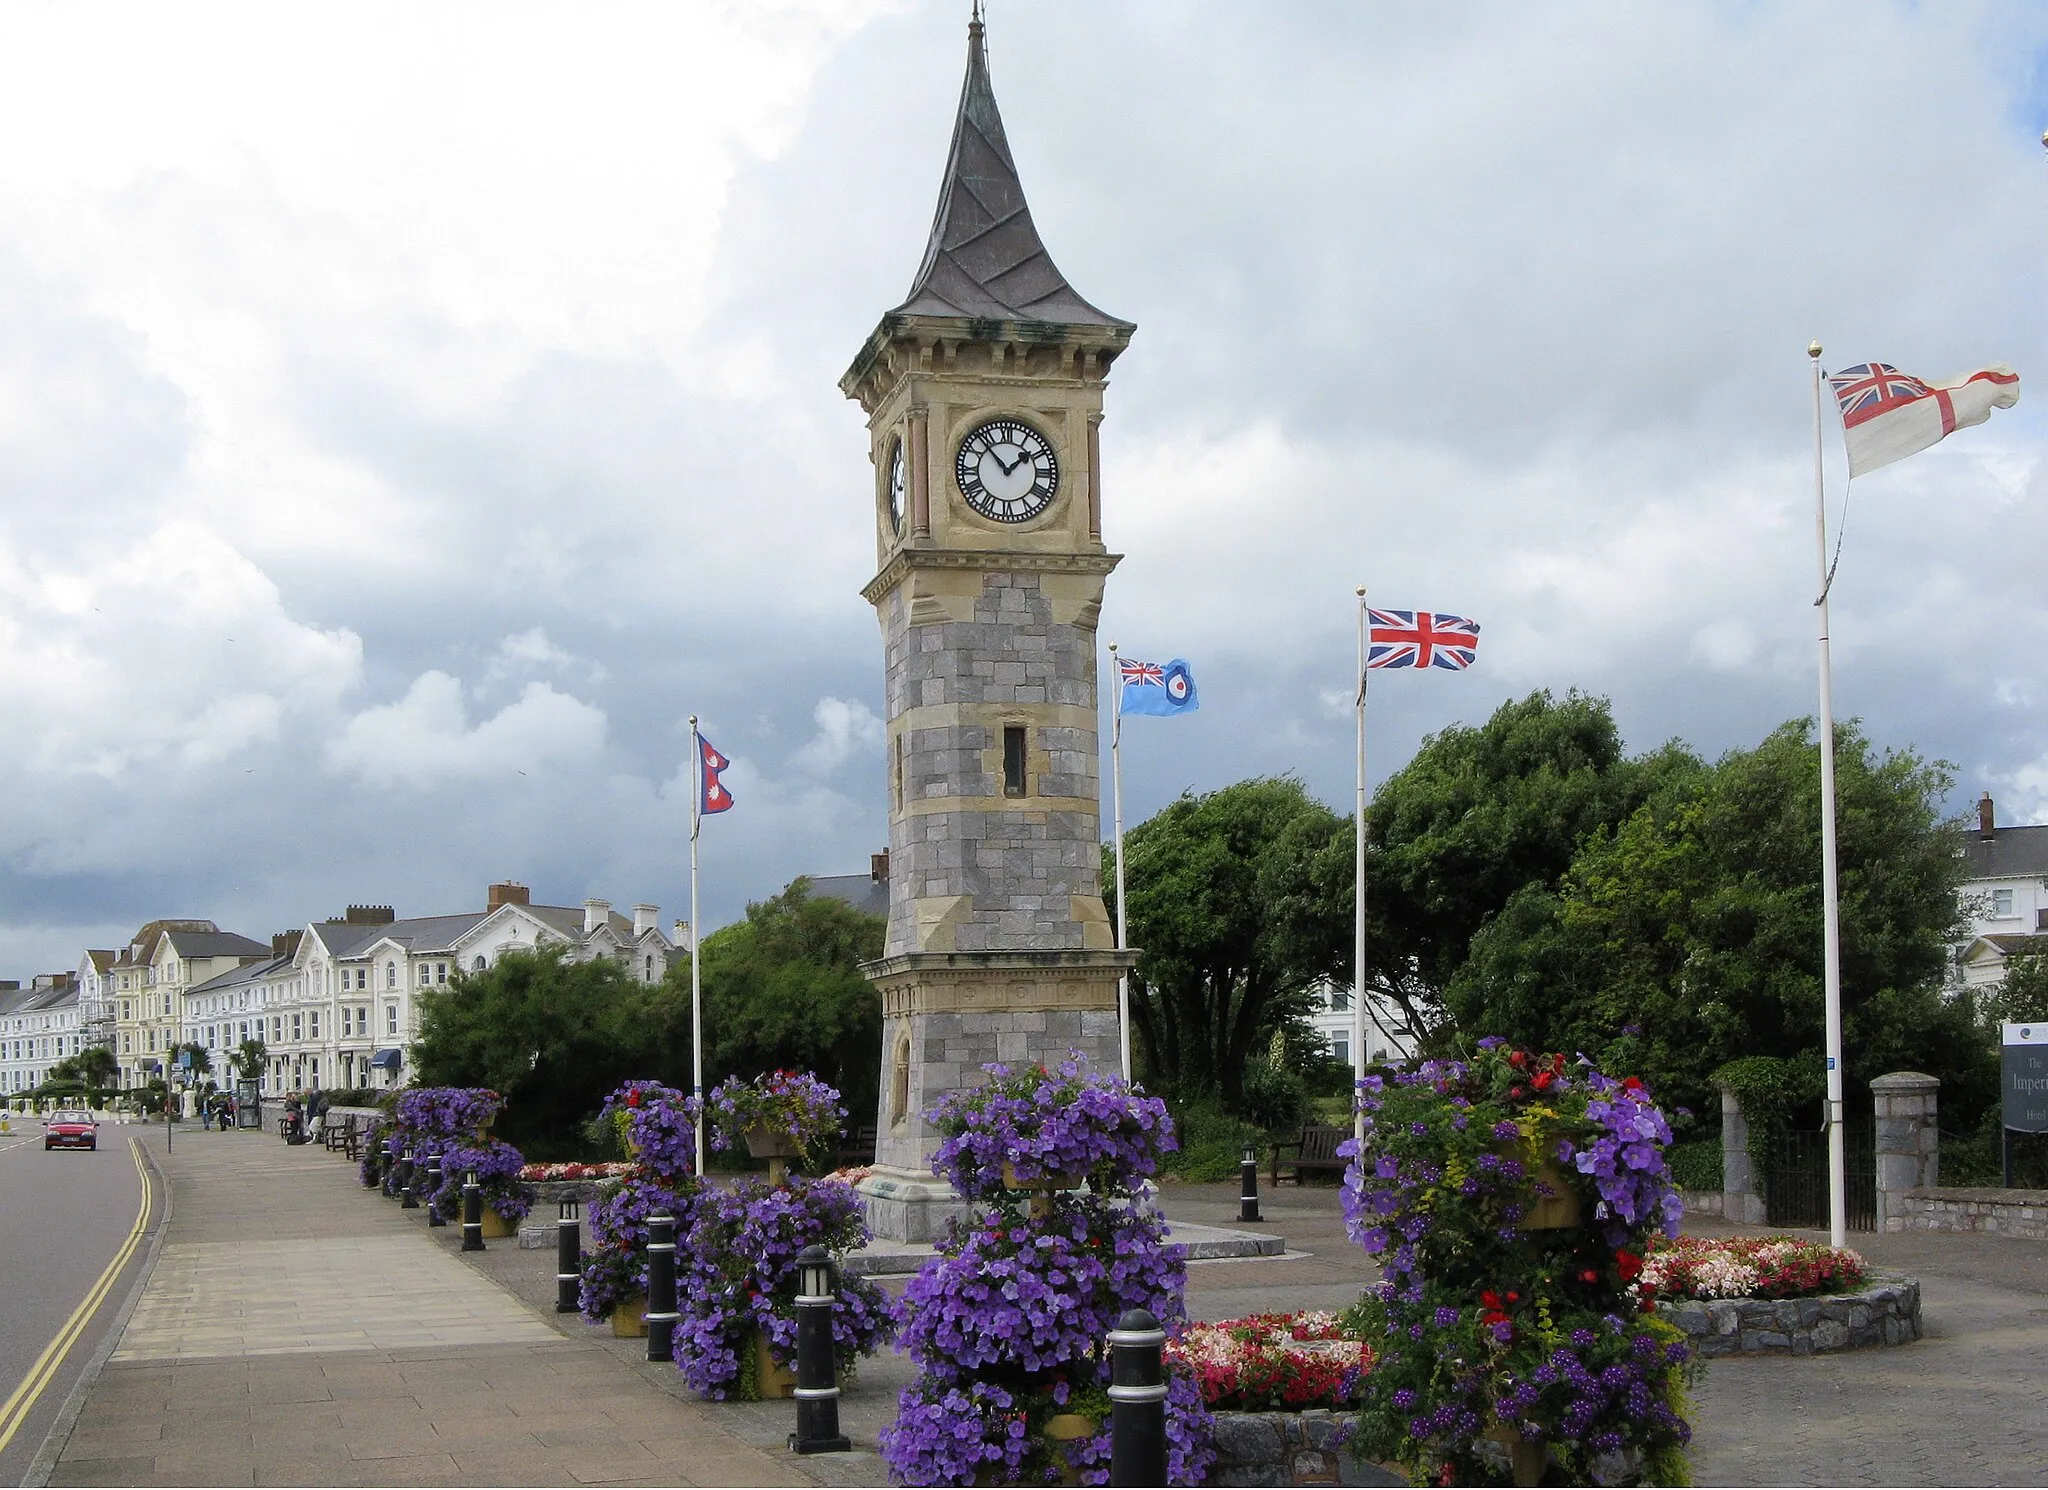 Photo showing: The Queen Victoria Diamond Jubilee Clock Tower on the Exmouth seafront, South Devon, England.